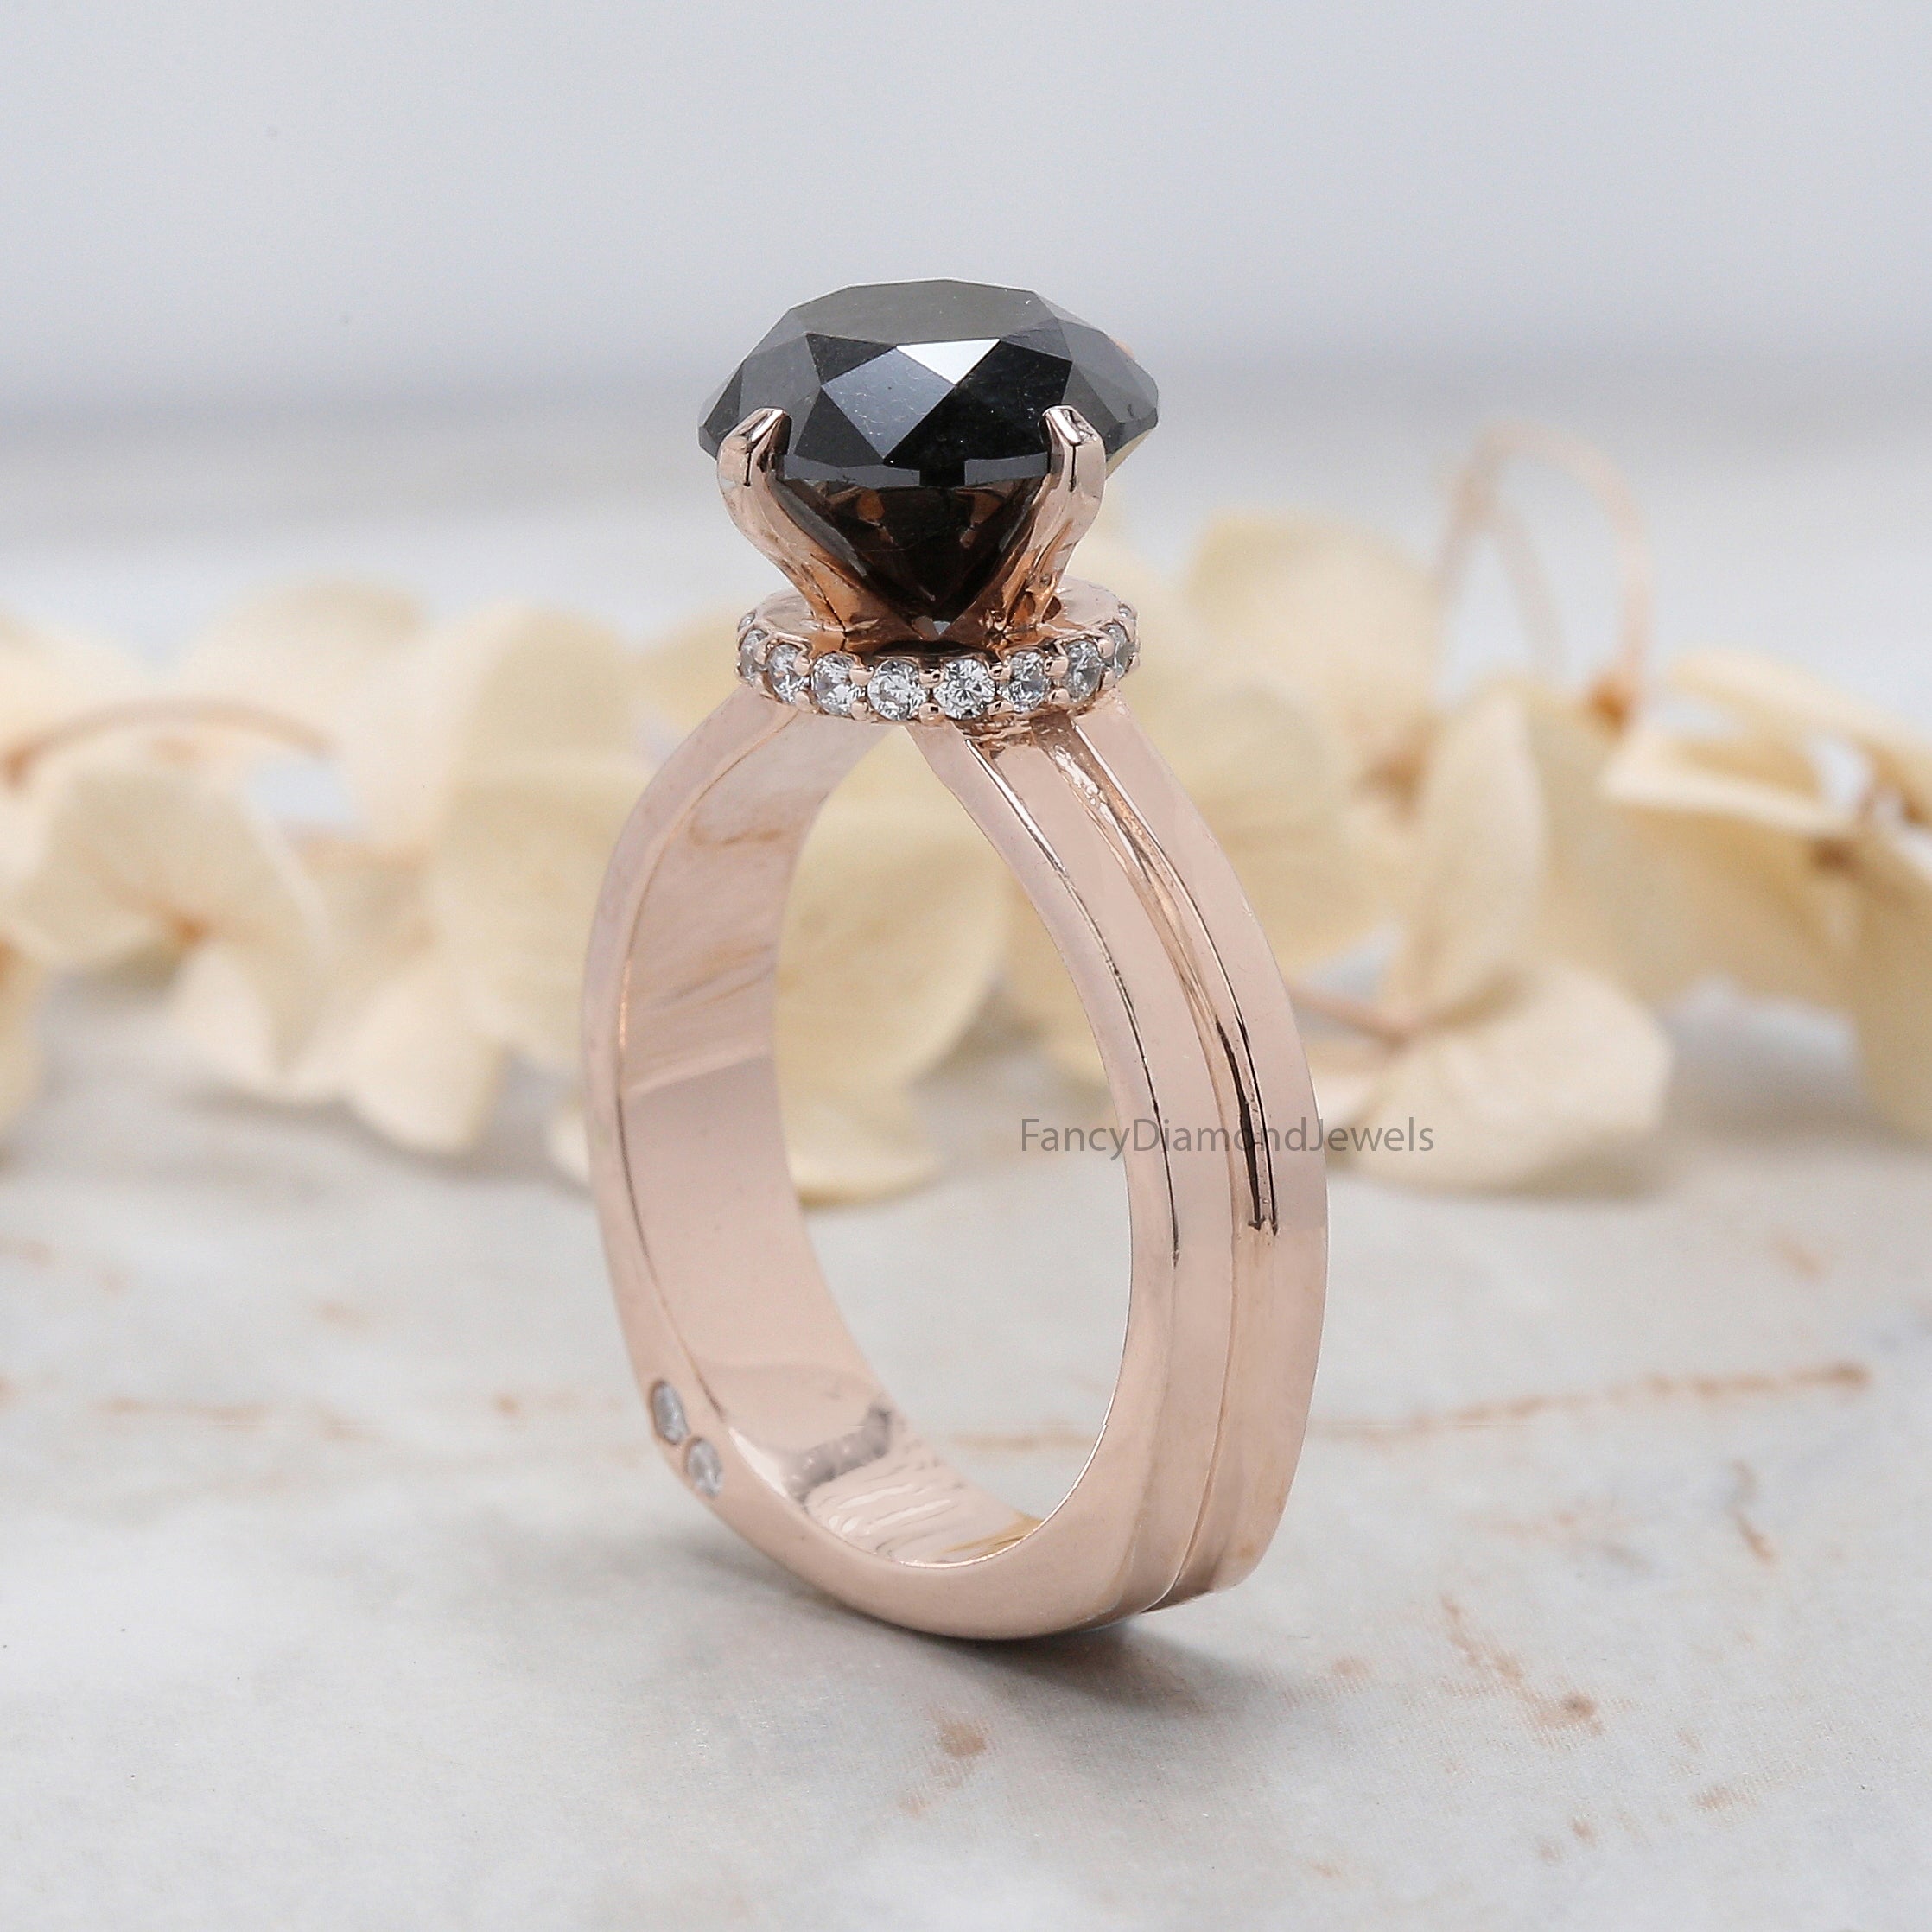 Round Cut Black Color Diamond Ring 3.76 Ct 9.30 MM Round Shape Diamond Ring 14K Solid Rose Gold Silver Engagement Ring Gift For Her QL8487